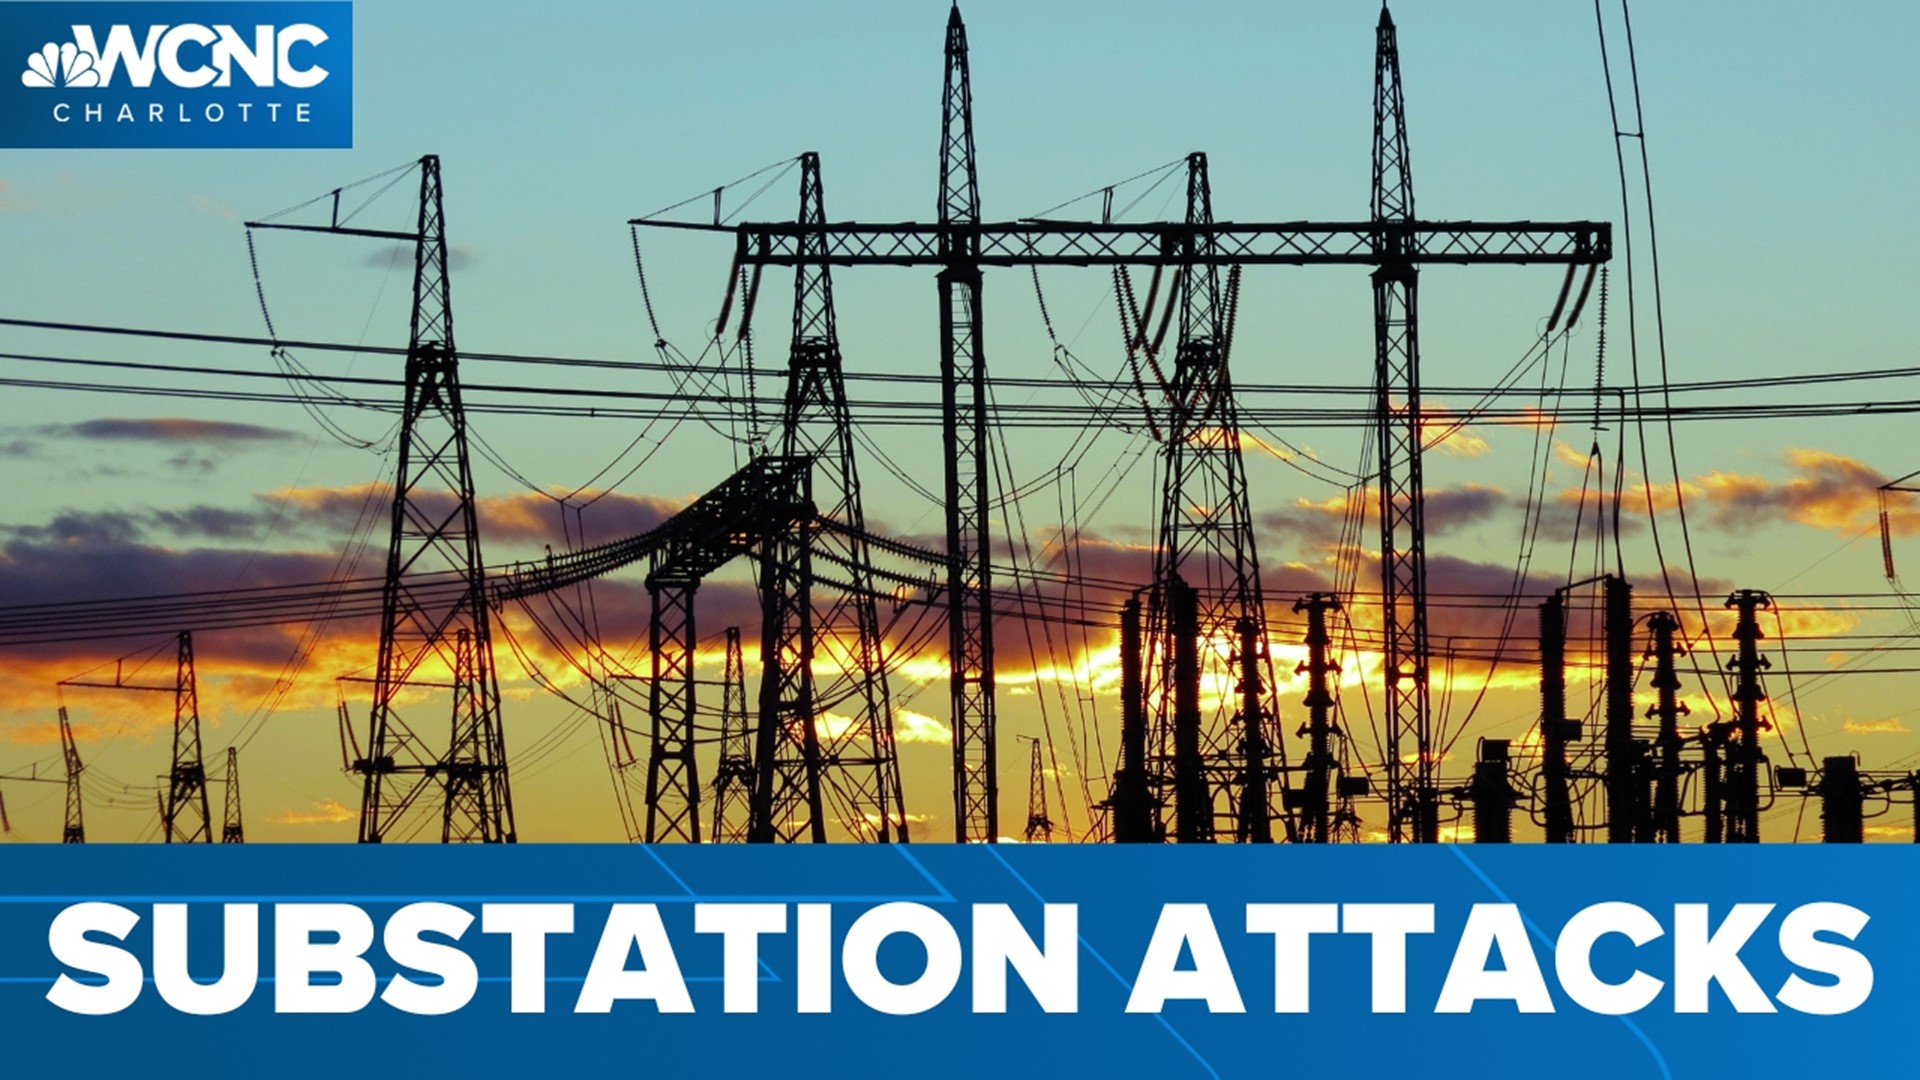 North and South Carolina lawmakers are pushing for safety changes at power facilities. This after a series of attacks on Carolina power grids.